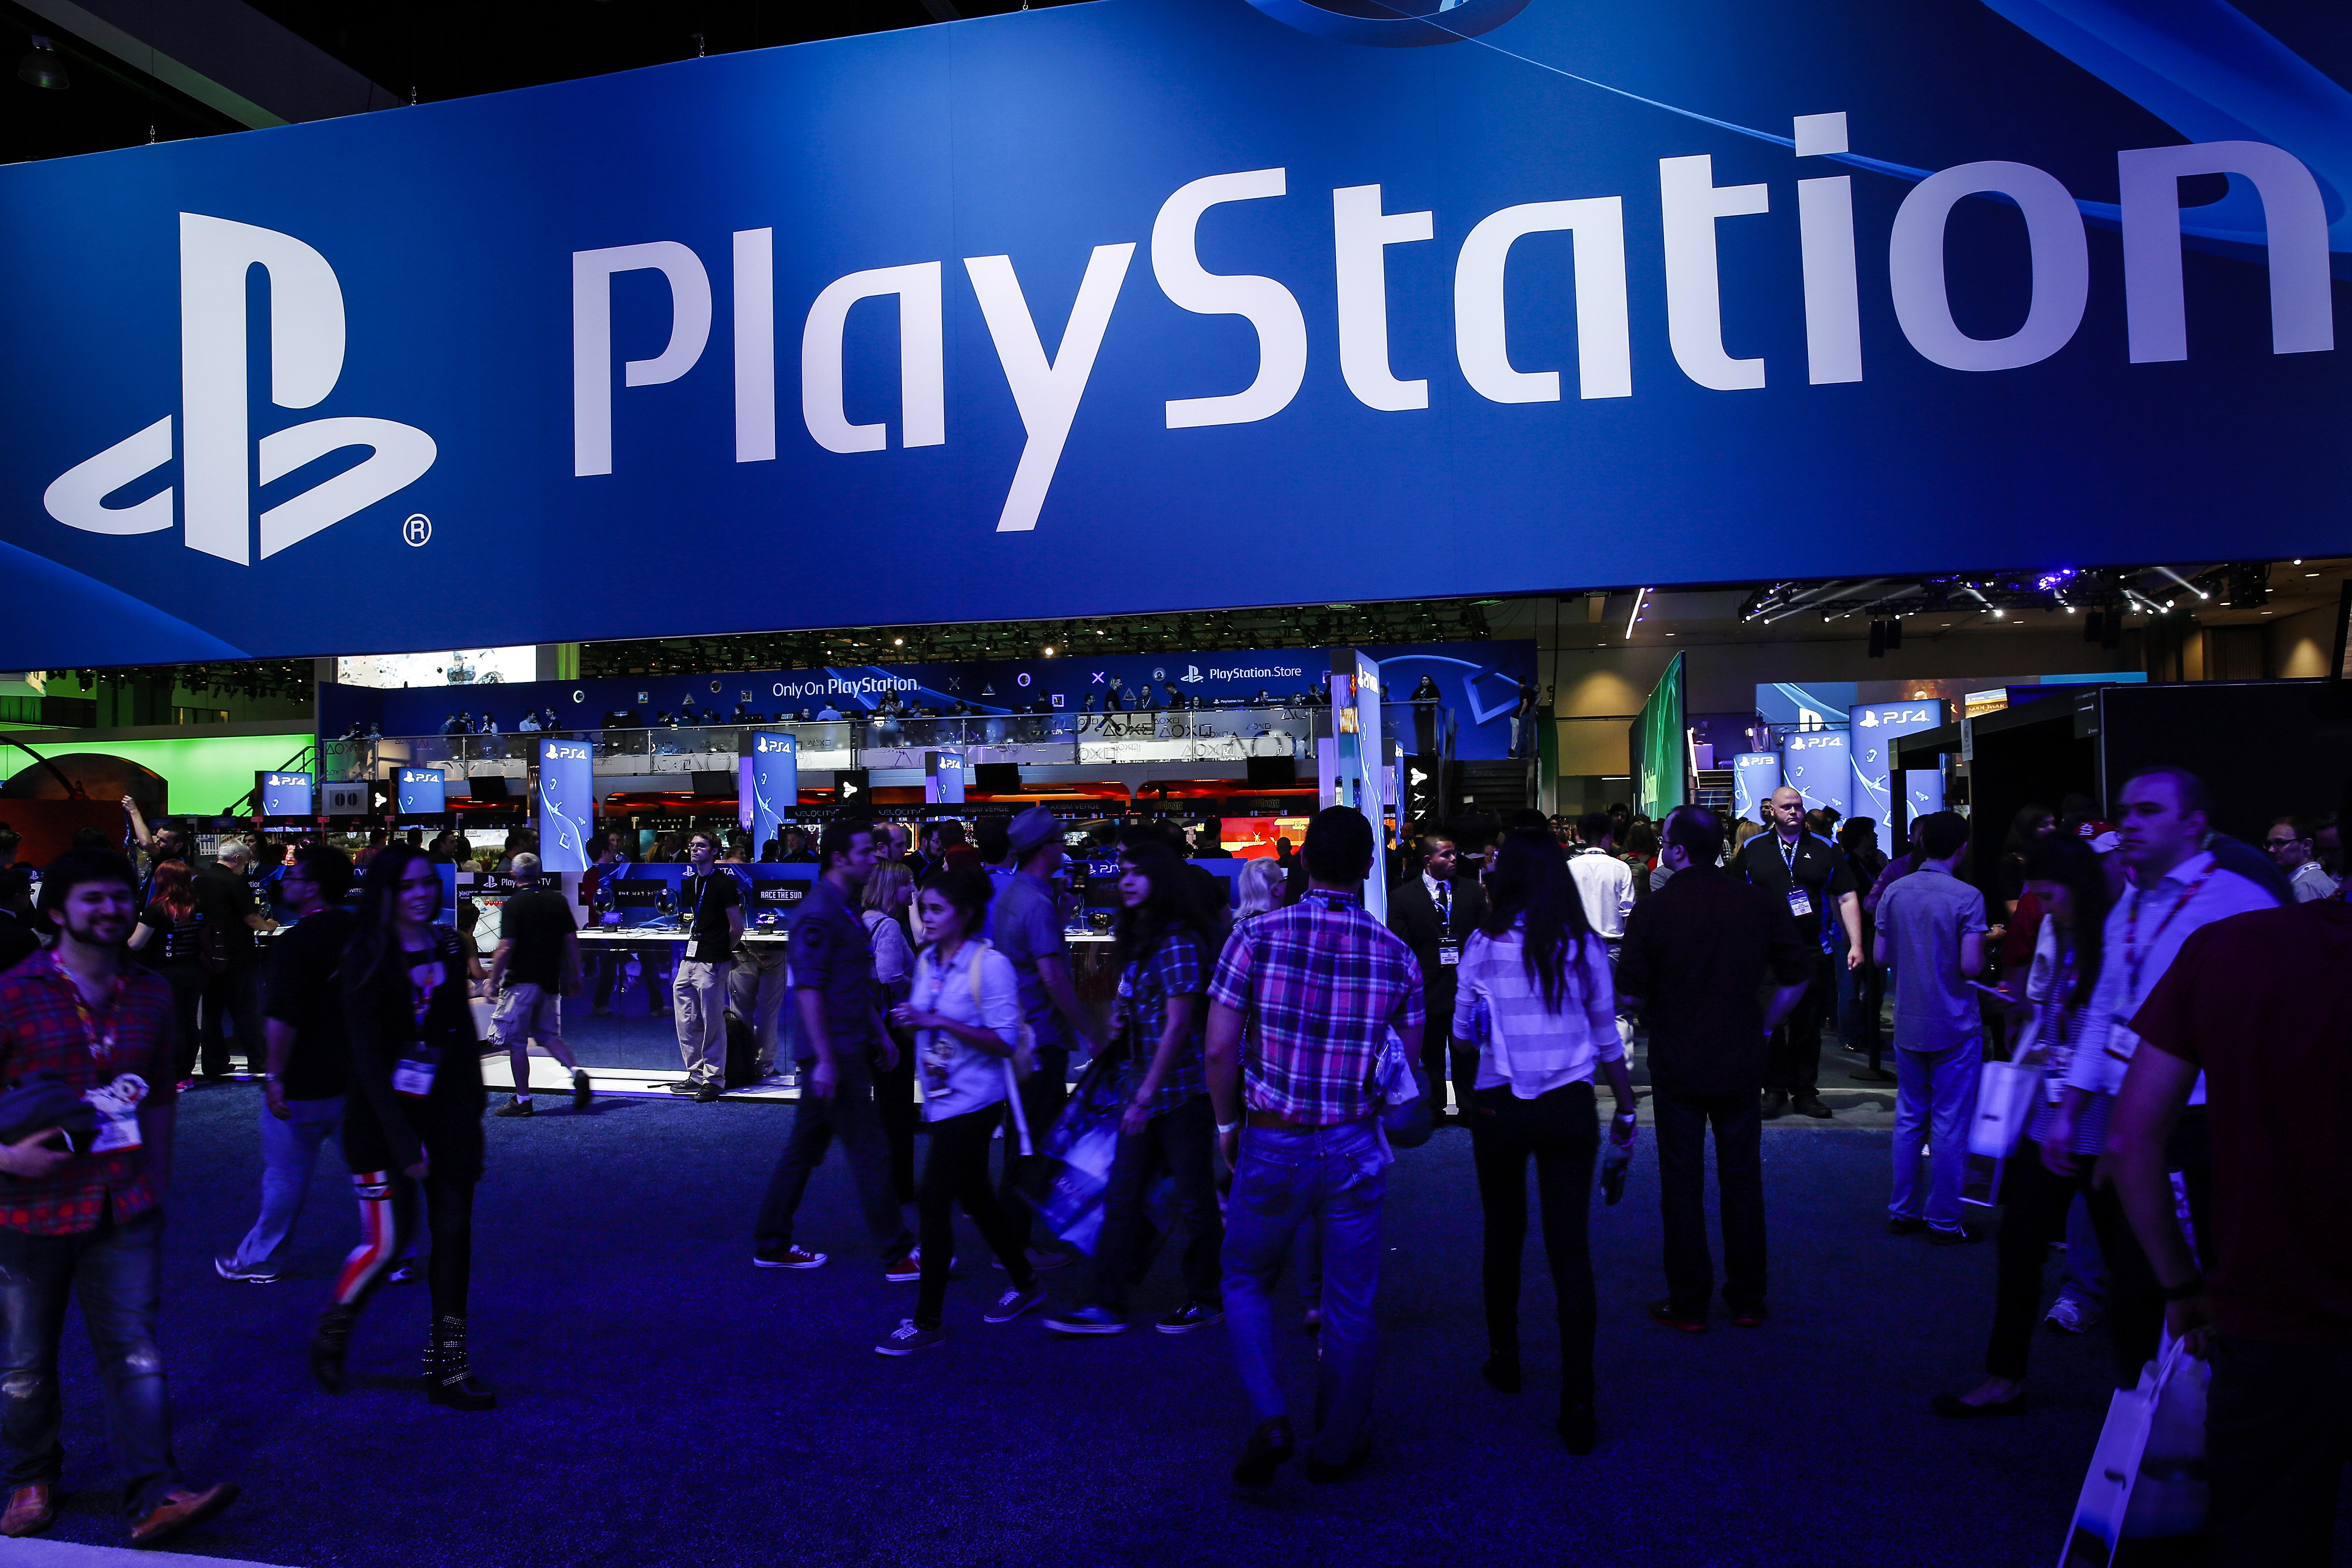 Attendees walk past the Sony Corp. PlayStation booth during the E3 Electronic Entertainment Expo in Los Angeles, California, U.S. on Tuesday, June 10, 2014. (Patrick T. Fallon/Bloomberg via Getty Images)